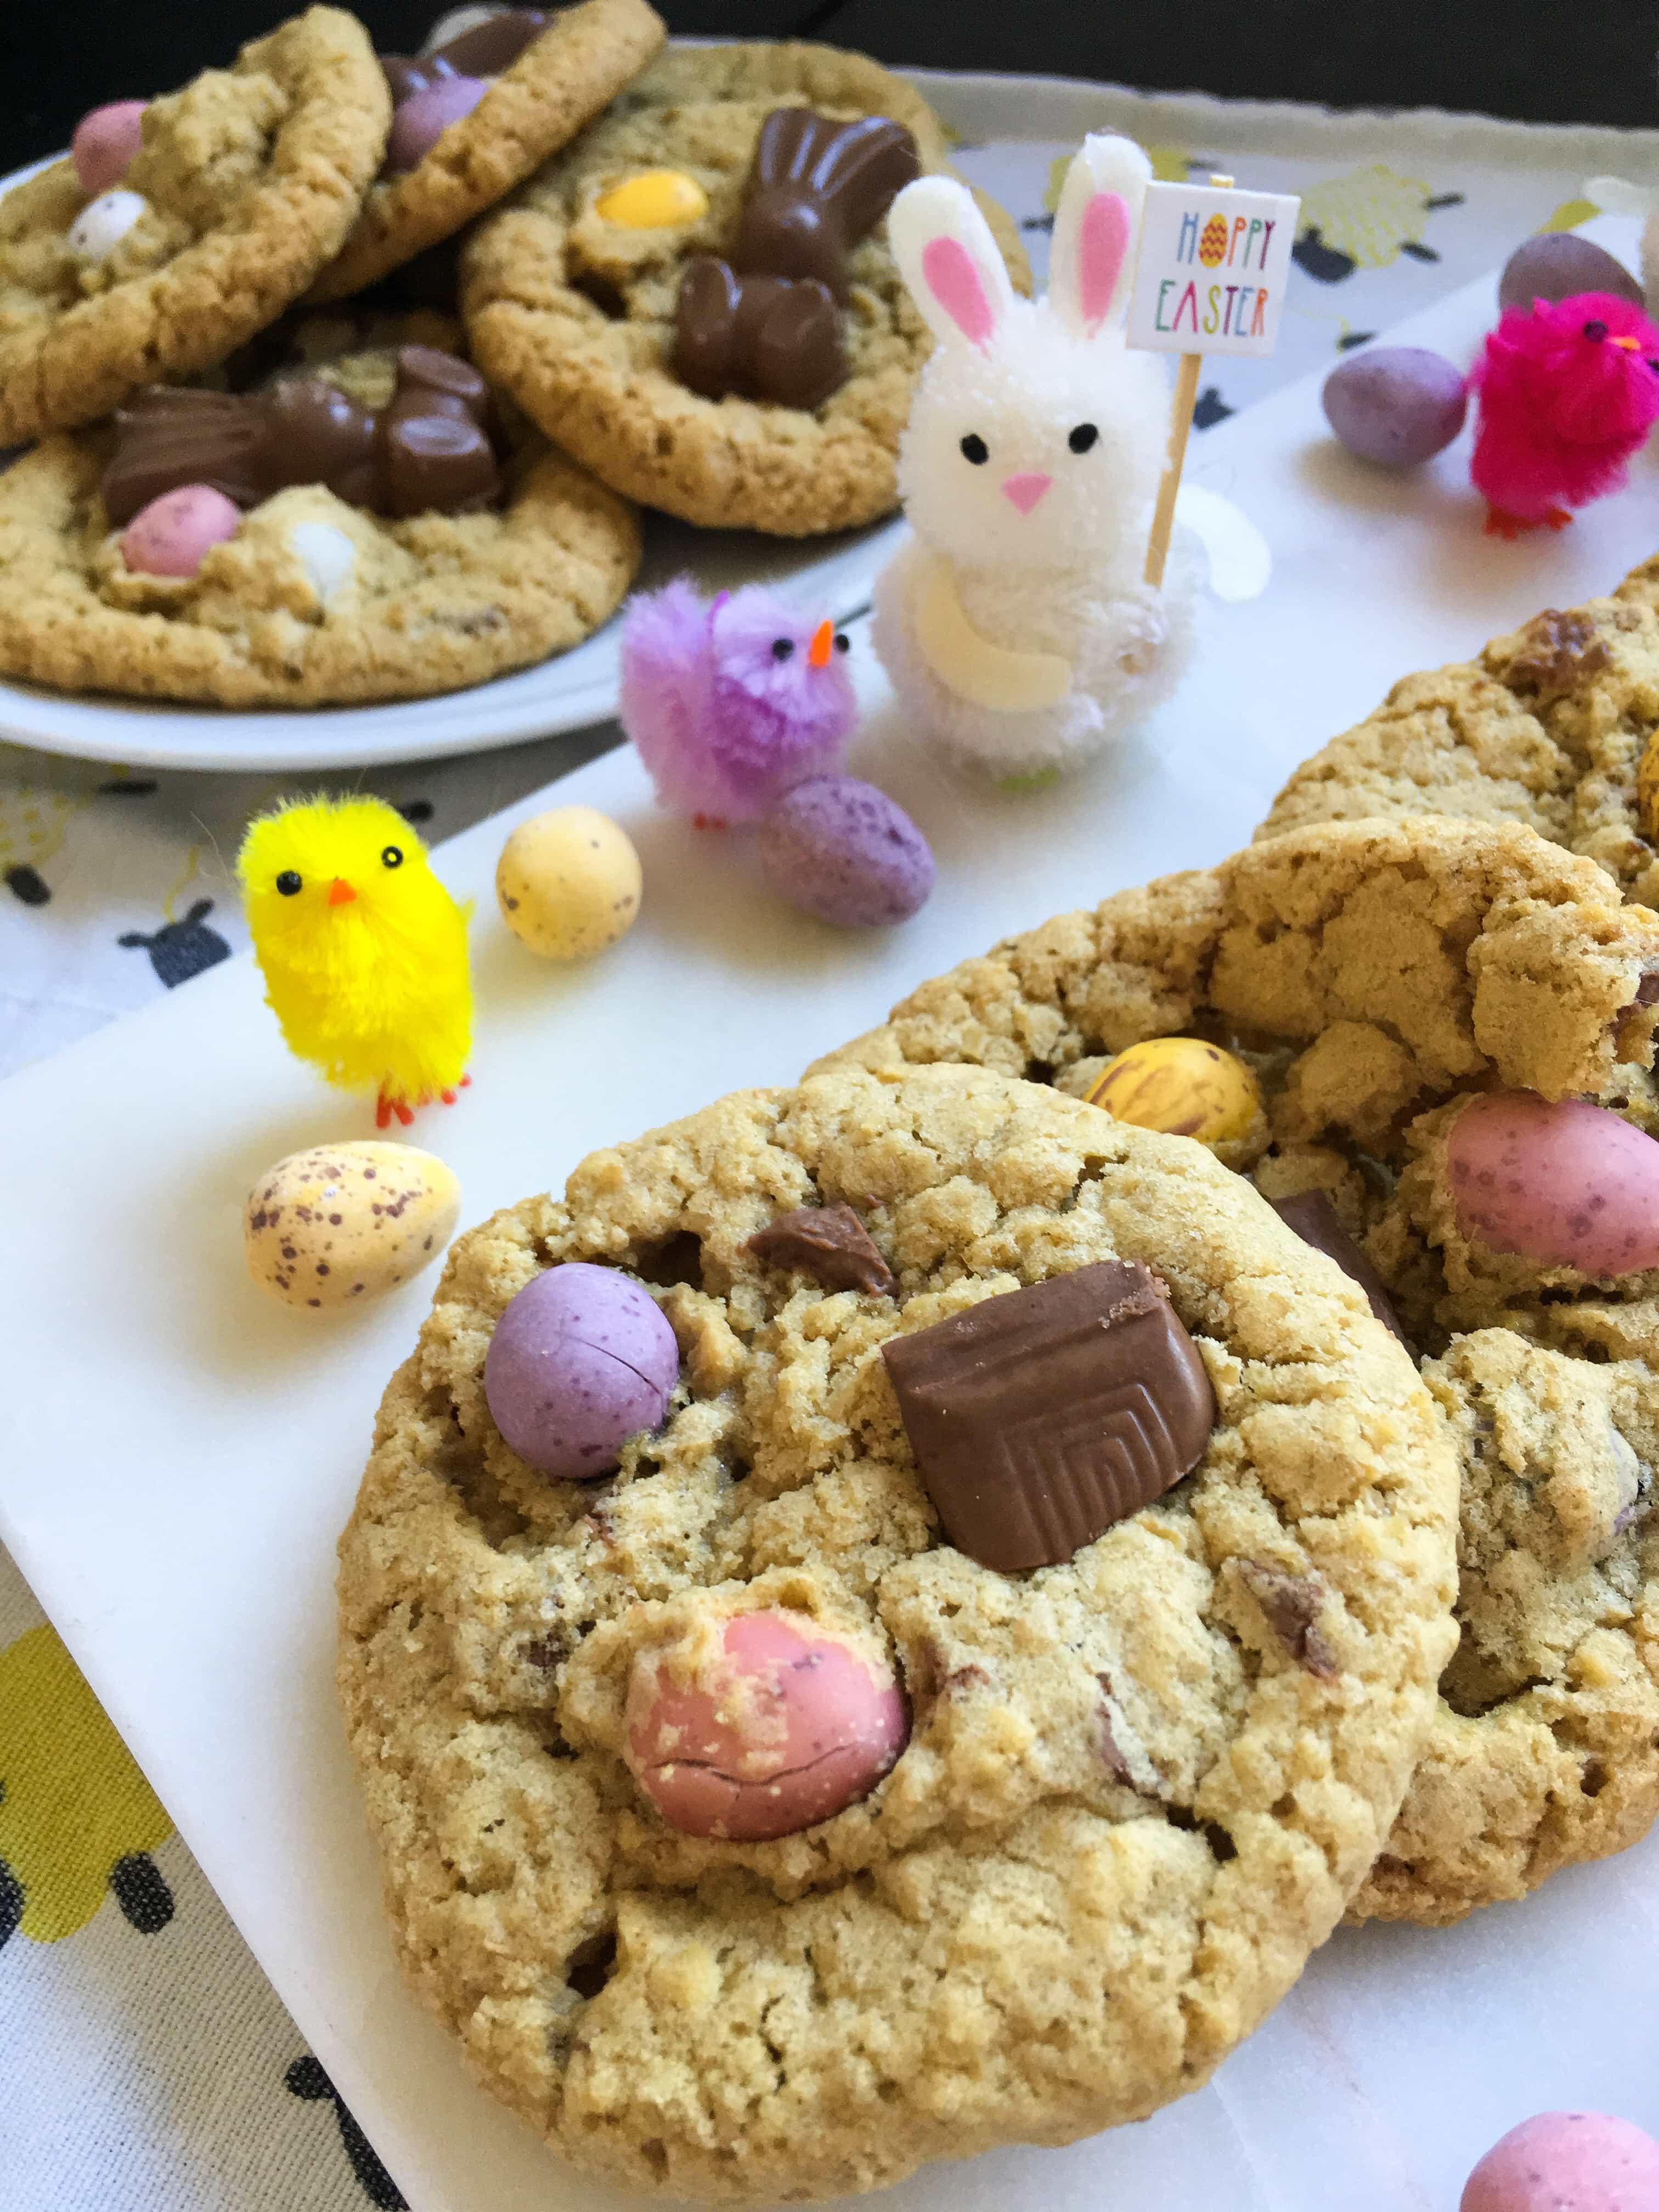 cookies topped with mini coloured chocolate eggs on a white board and decorative Easter chicks and bunny toys. A plate of cookies can be seen in the background.